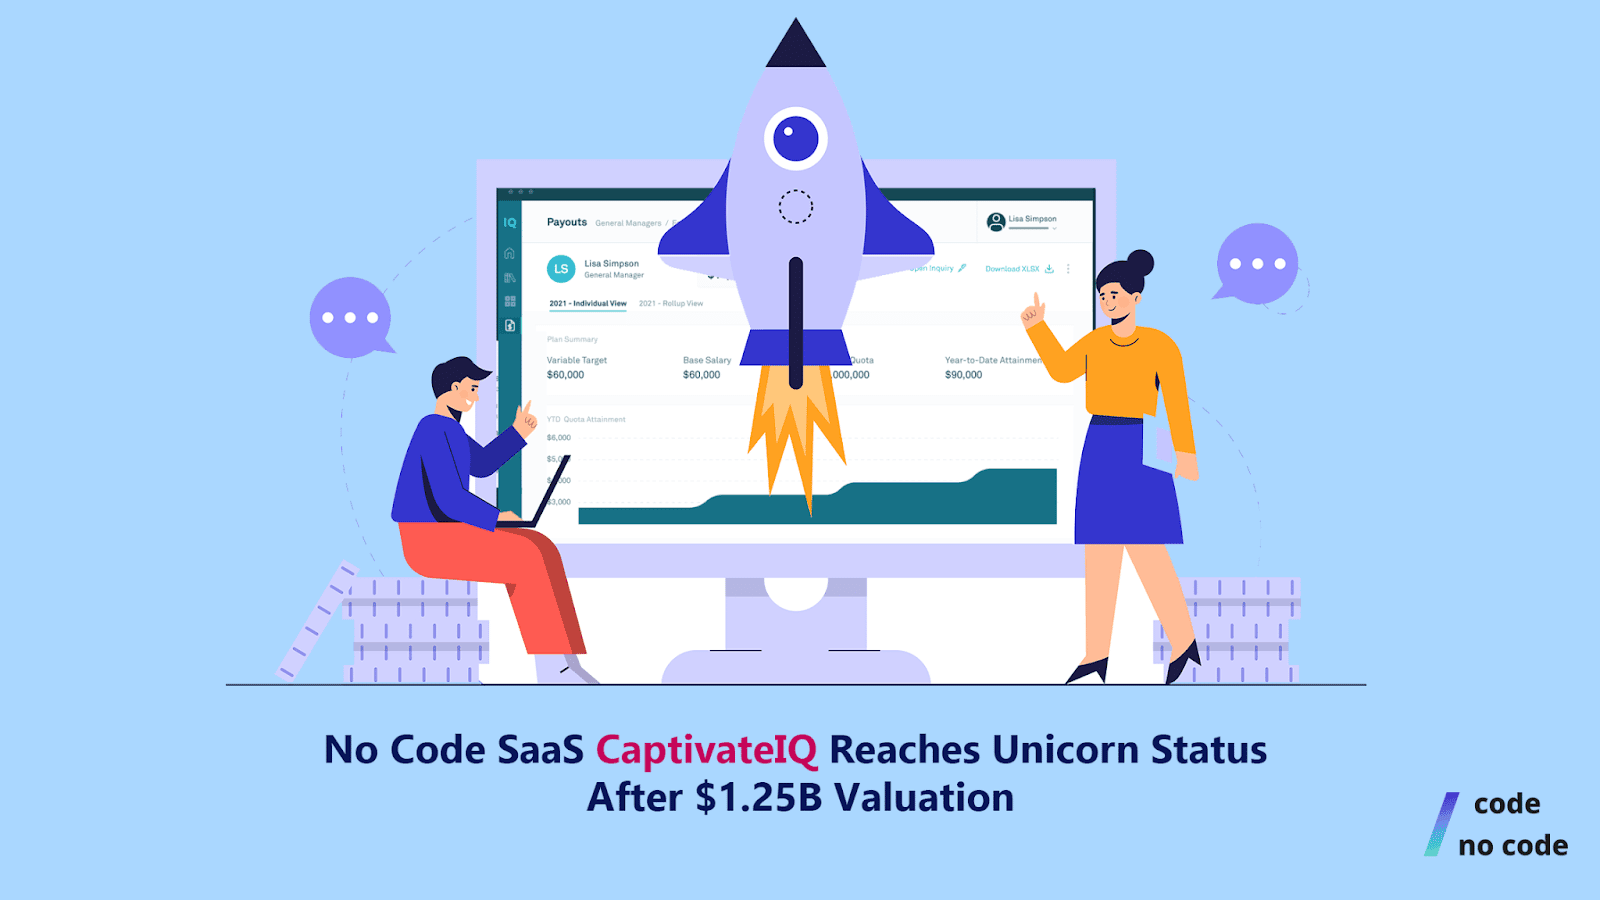 two people looking at a computer screen and a spaceship launching out of it, with the text "No Code saas captivateiq reaches unicorn status after $1.25B valuation"